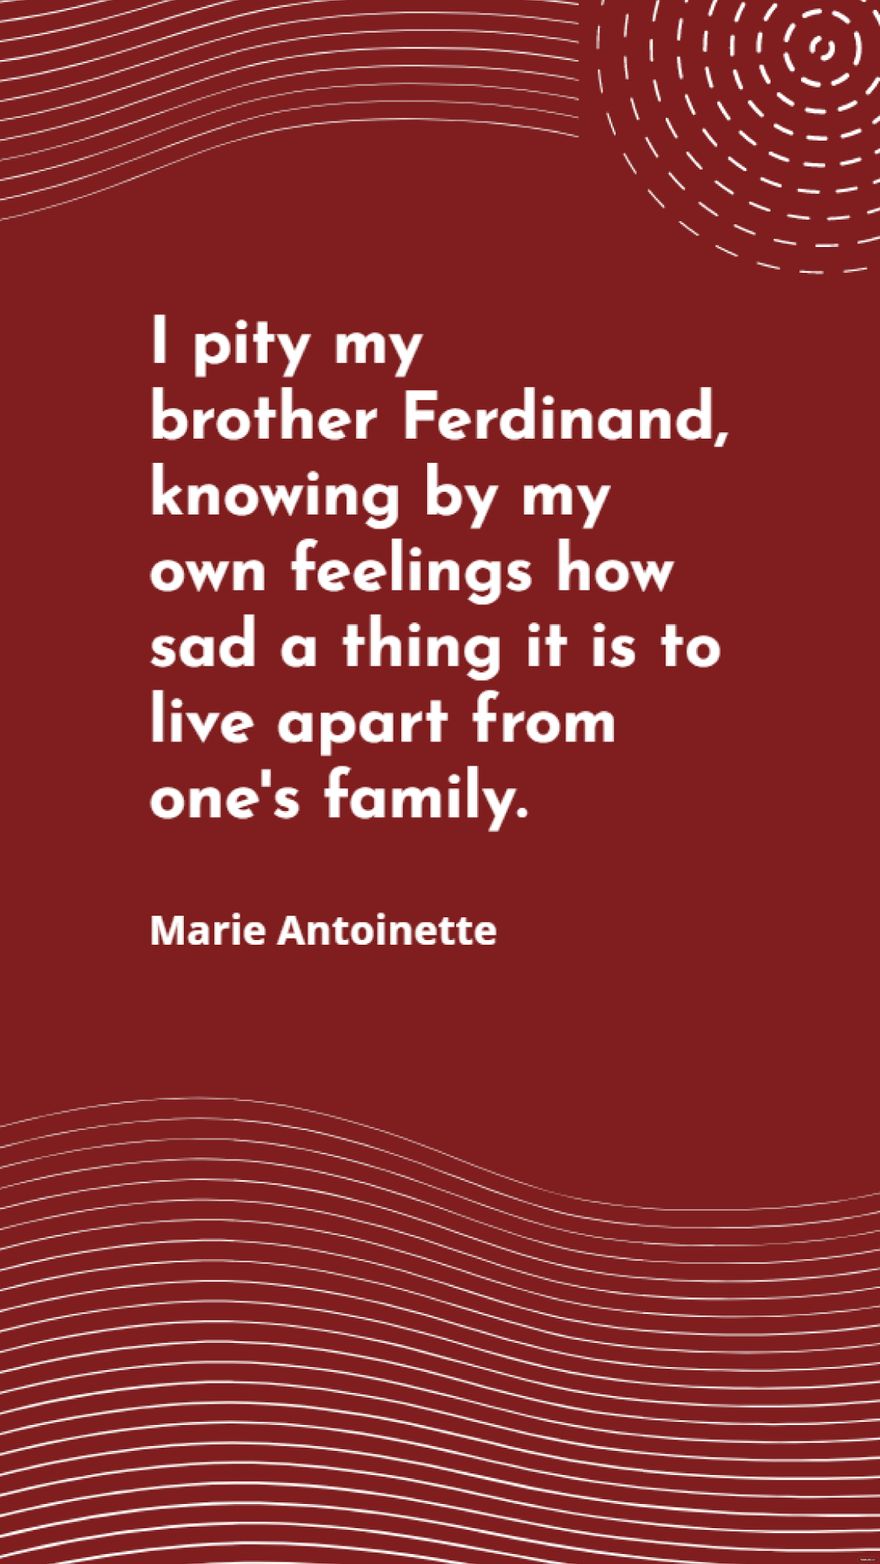 Marie Antoinette - I pity my brother Ferdinand, knowing by my own feelings how sad a thing it is to live apart from one's family.